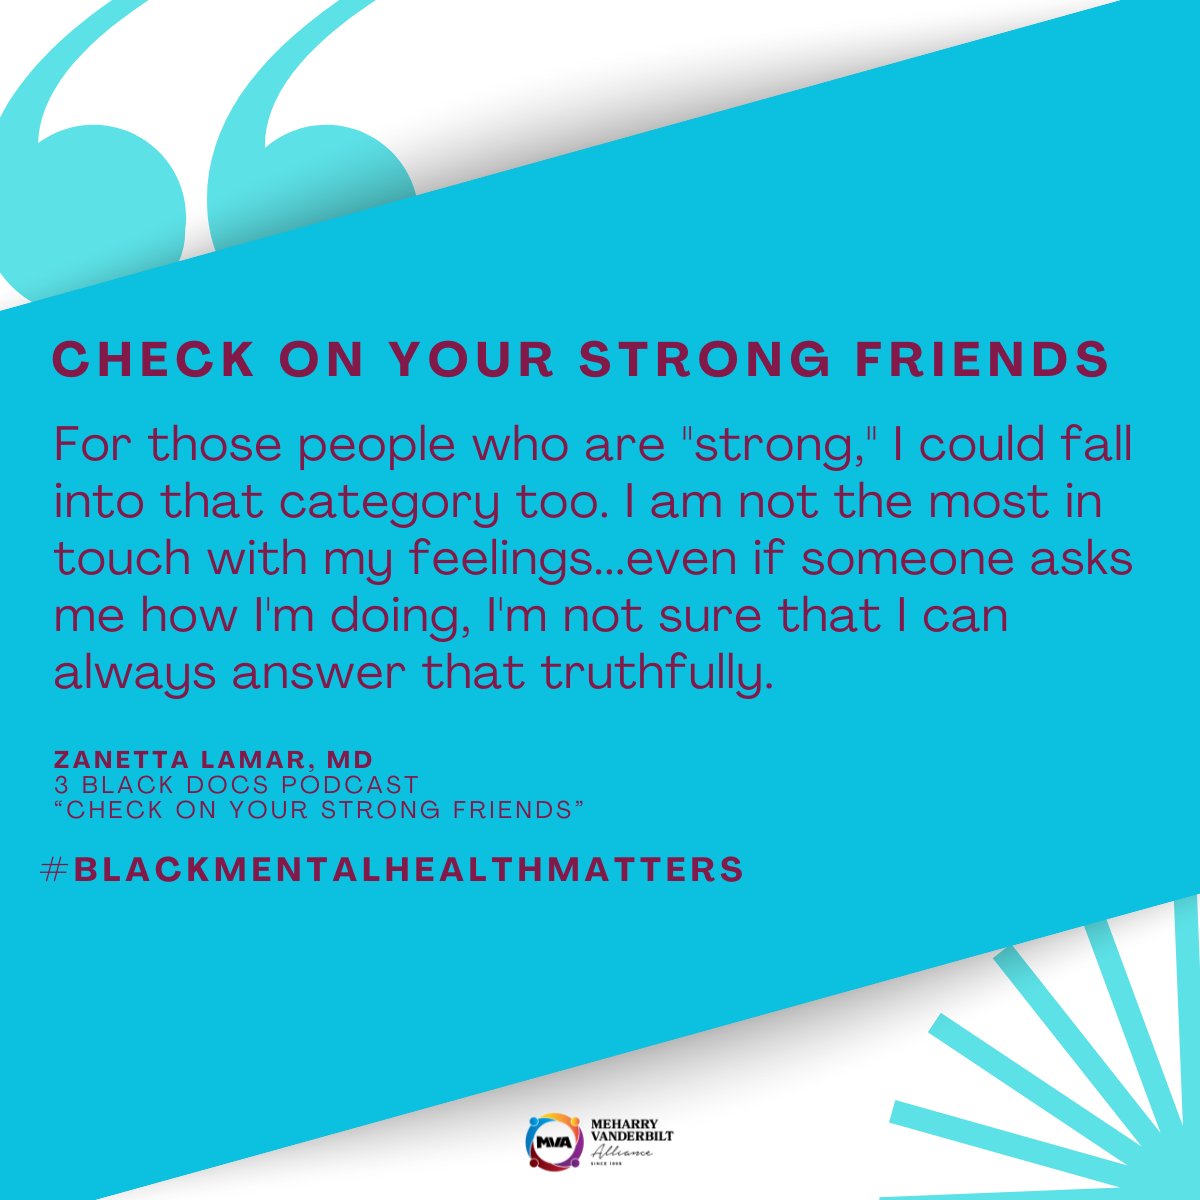 Displaying strength doesn't mean we are invulnerable. Even the strongest among us need support. Tune in to this enlightening conversation about emotional awareness from the 3 Black Docs Podcas 'Check on Your Strong Friends': bit.ly/3USb1Gi. @DrWinkfield #SupportEachOther